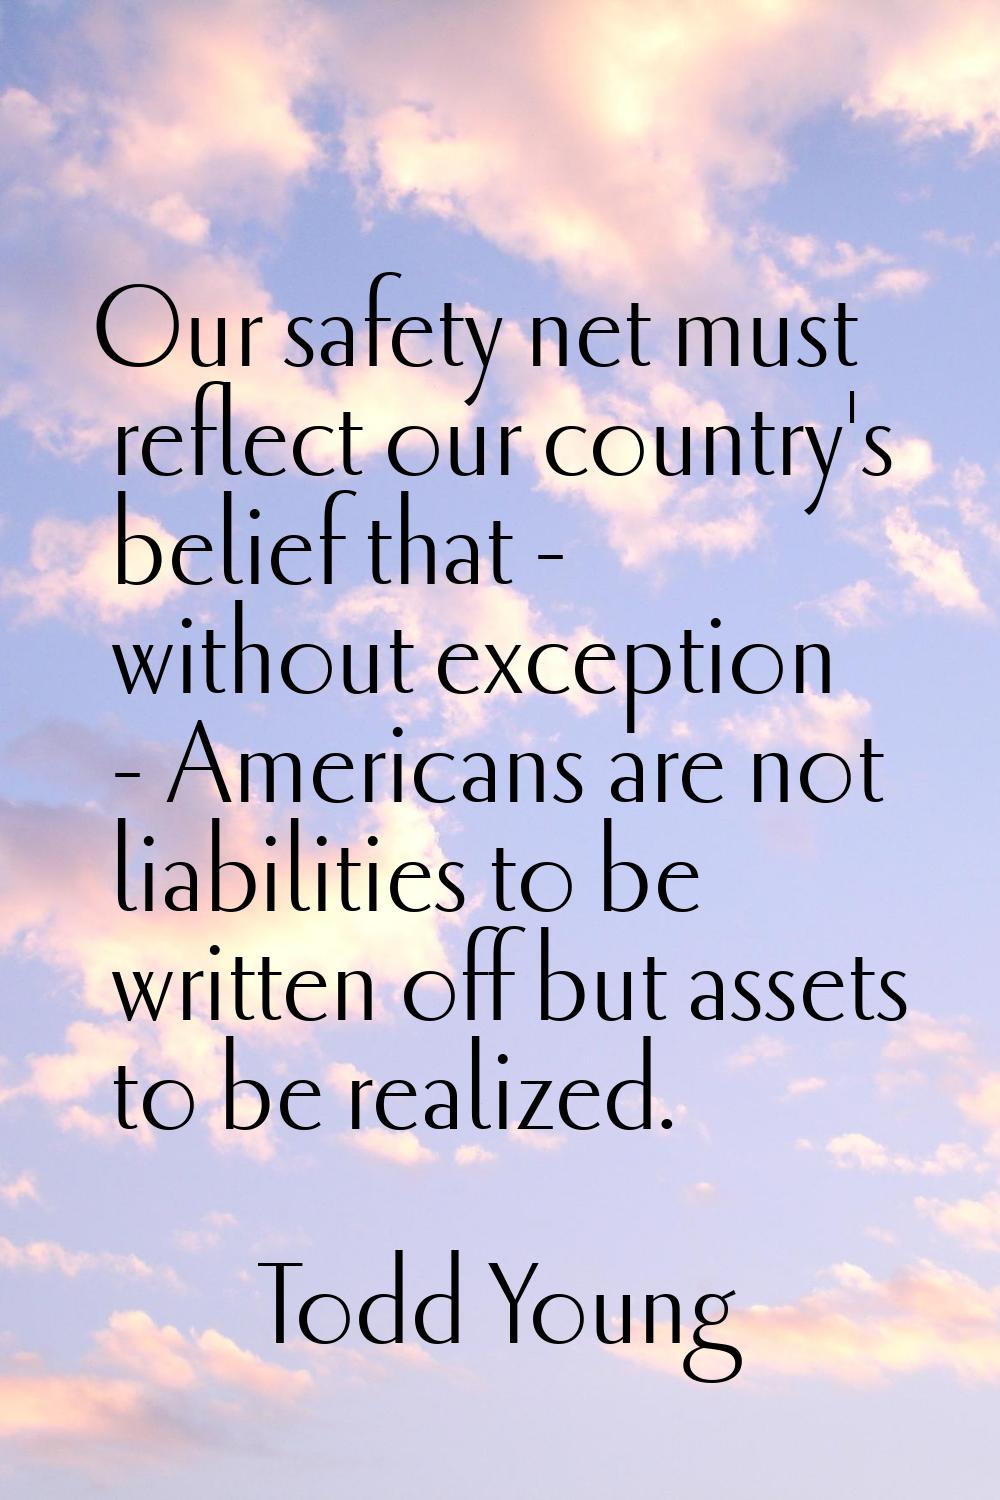 Our safety net must reflect our country's belief that - without exception - Americans are not liabi